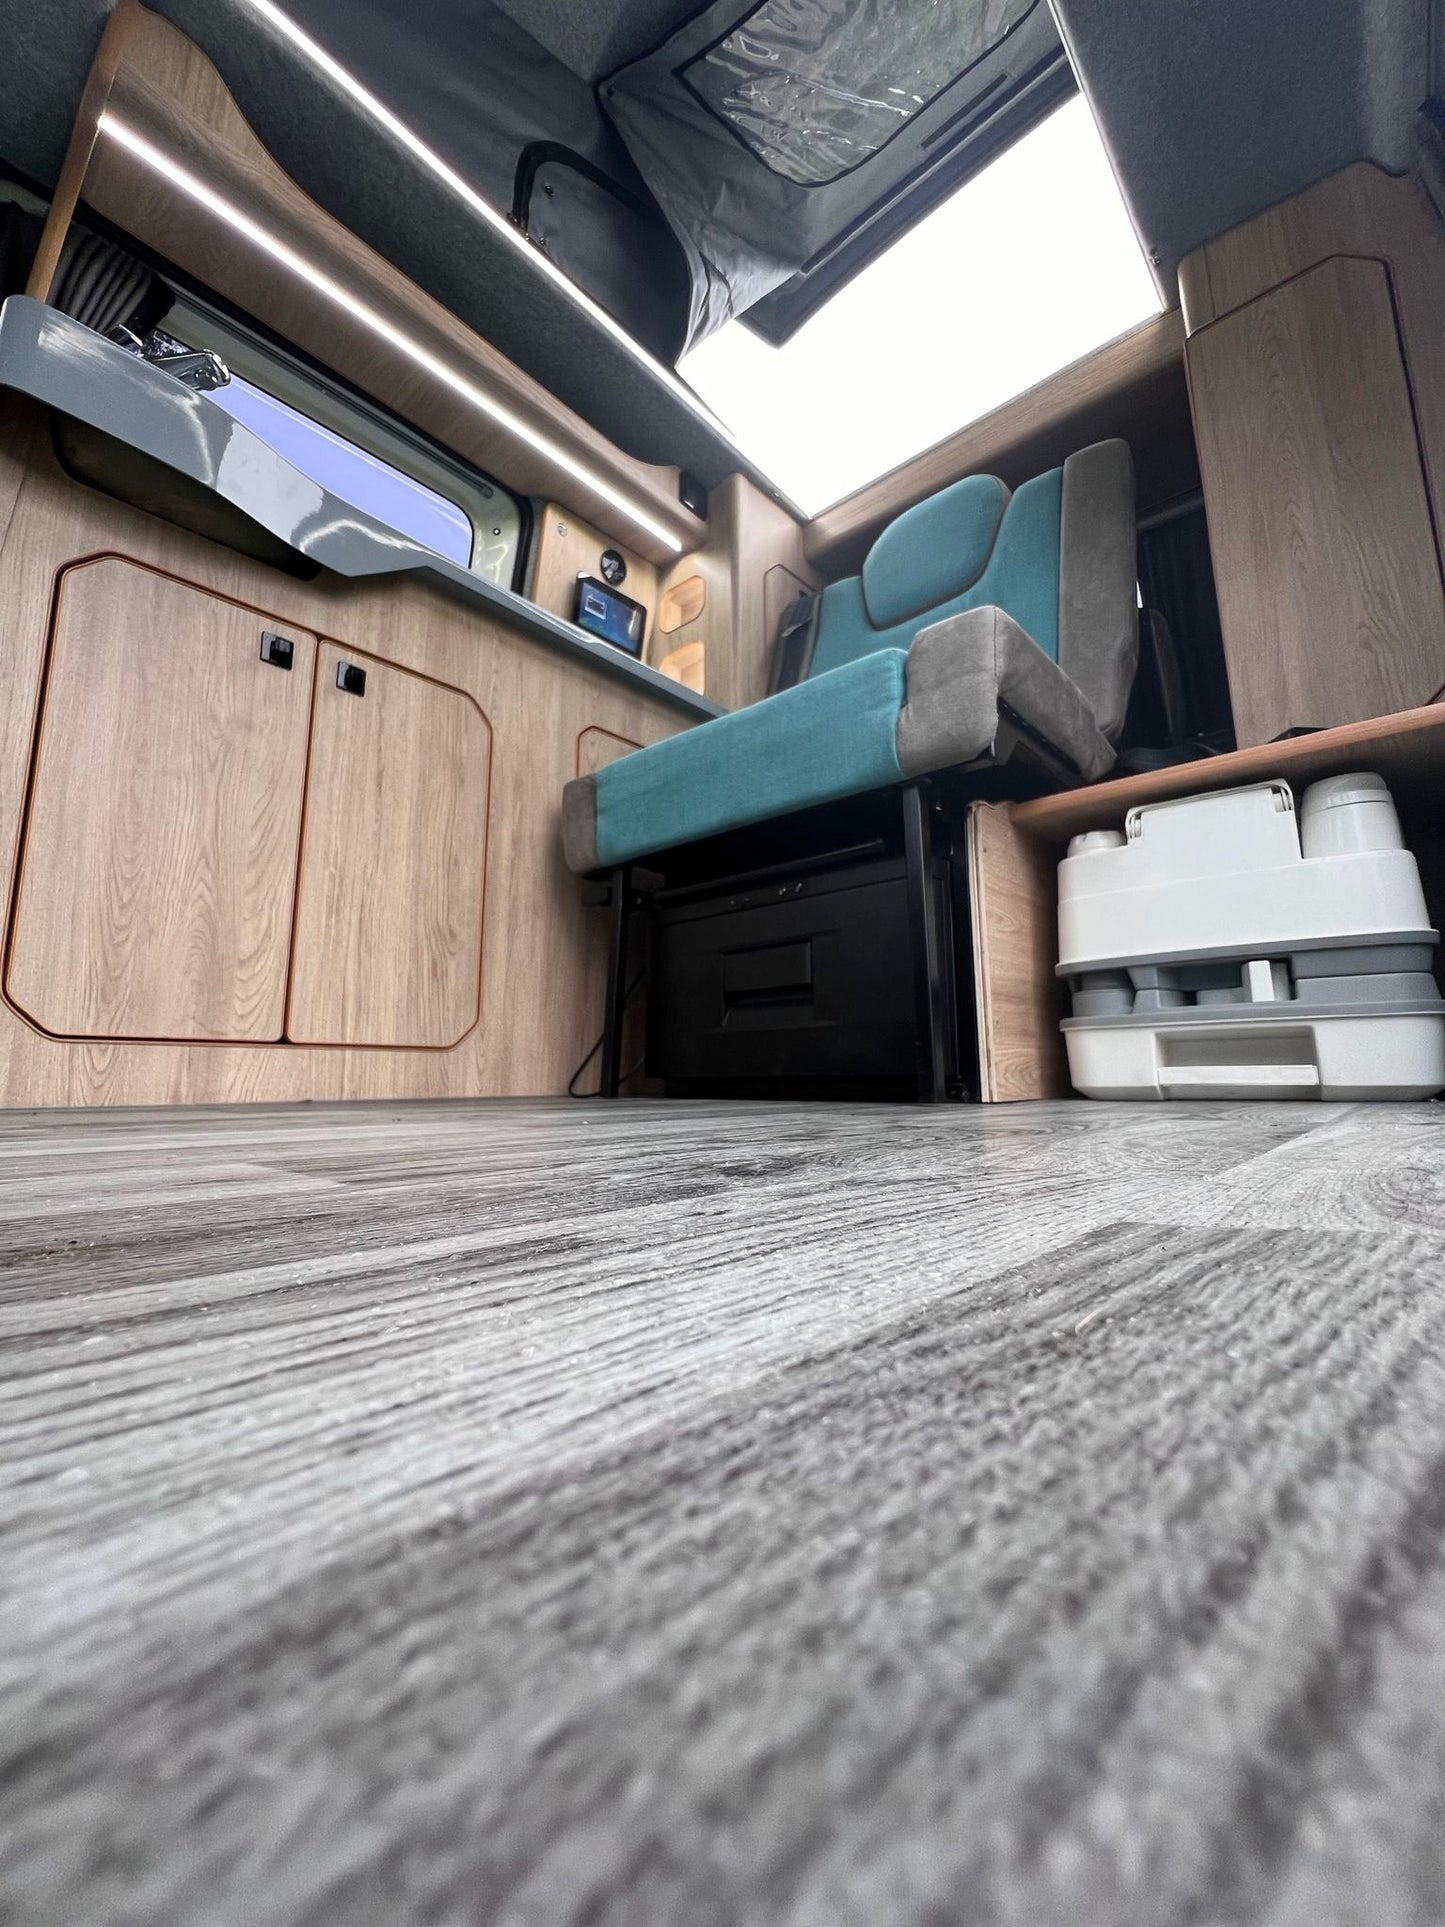 The Hopton Solo or Duo Camper Van Conversion for the Vauxhall Vivaro, Fiat Scudo, Peugeot Expert & Citroen Dispatch Diesel or Electric Camper.